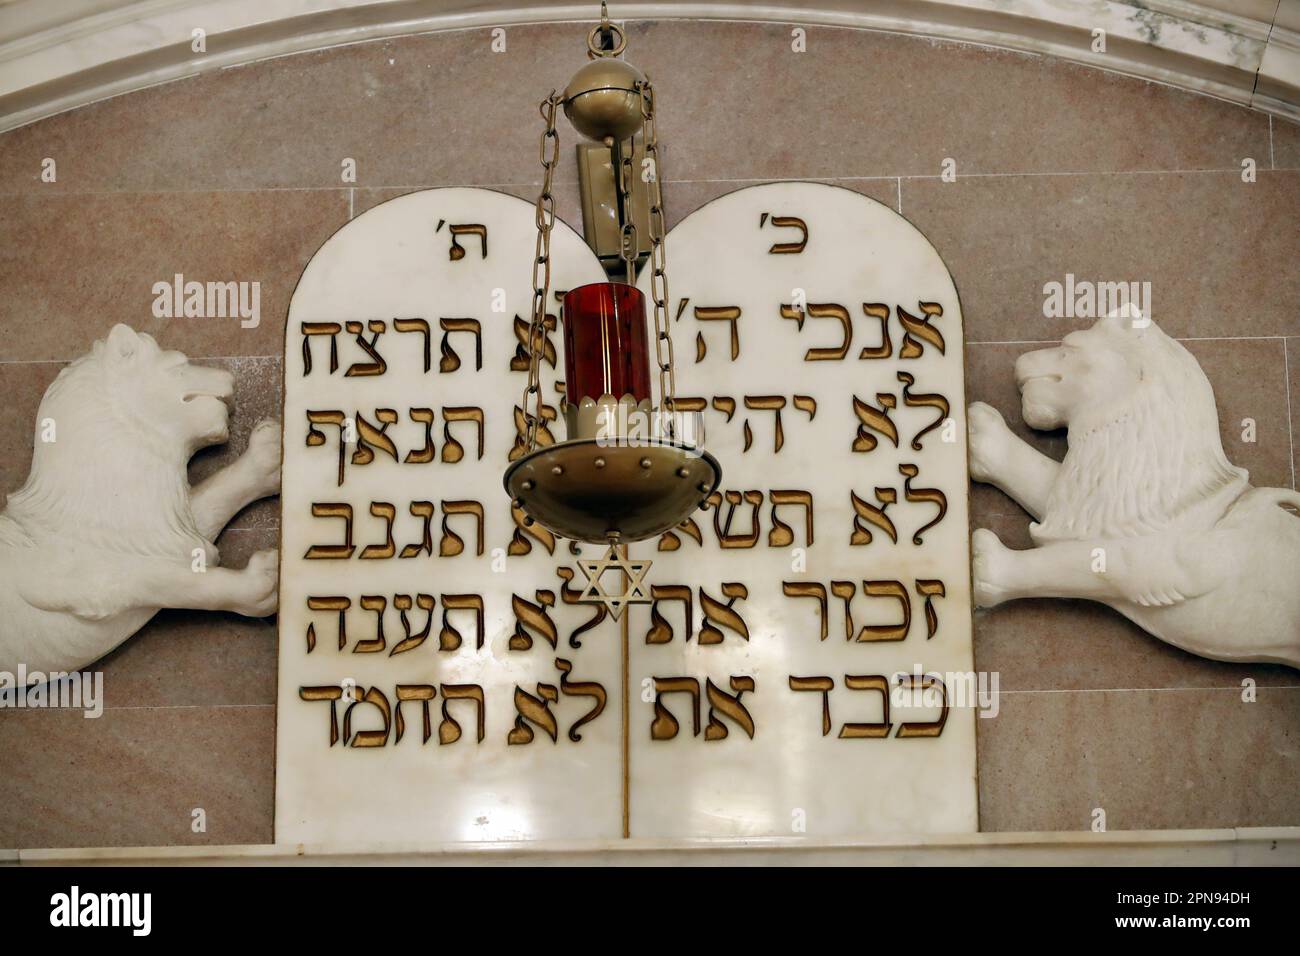 Jewish Museum of Florida.  The 10 commandments or tables of the law. Stock Photo